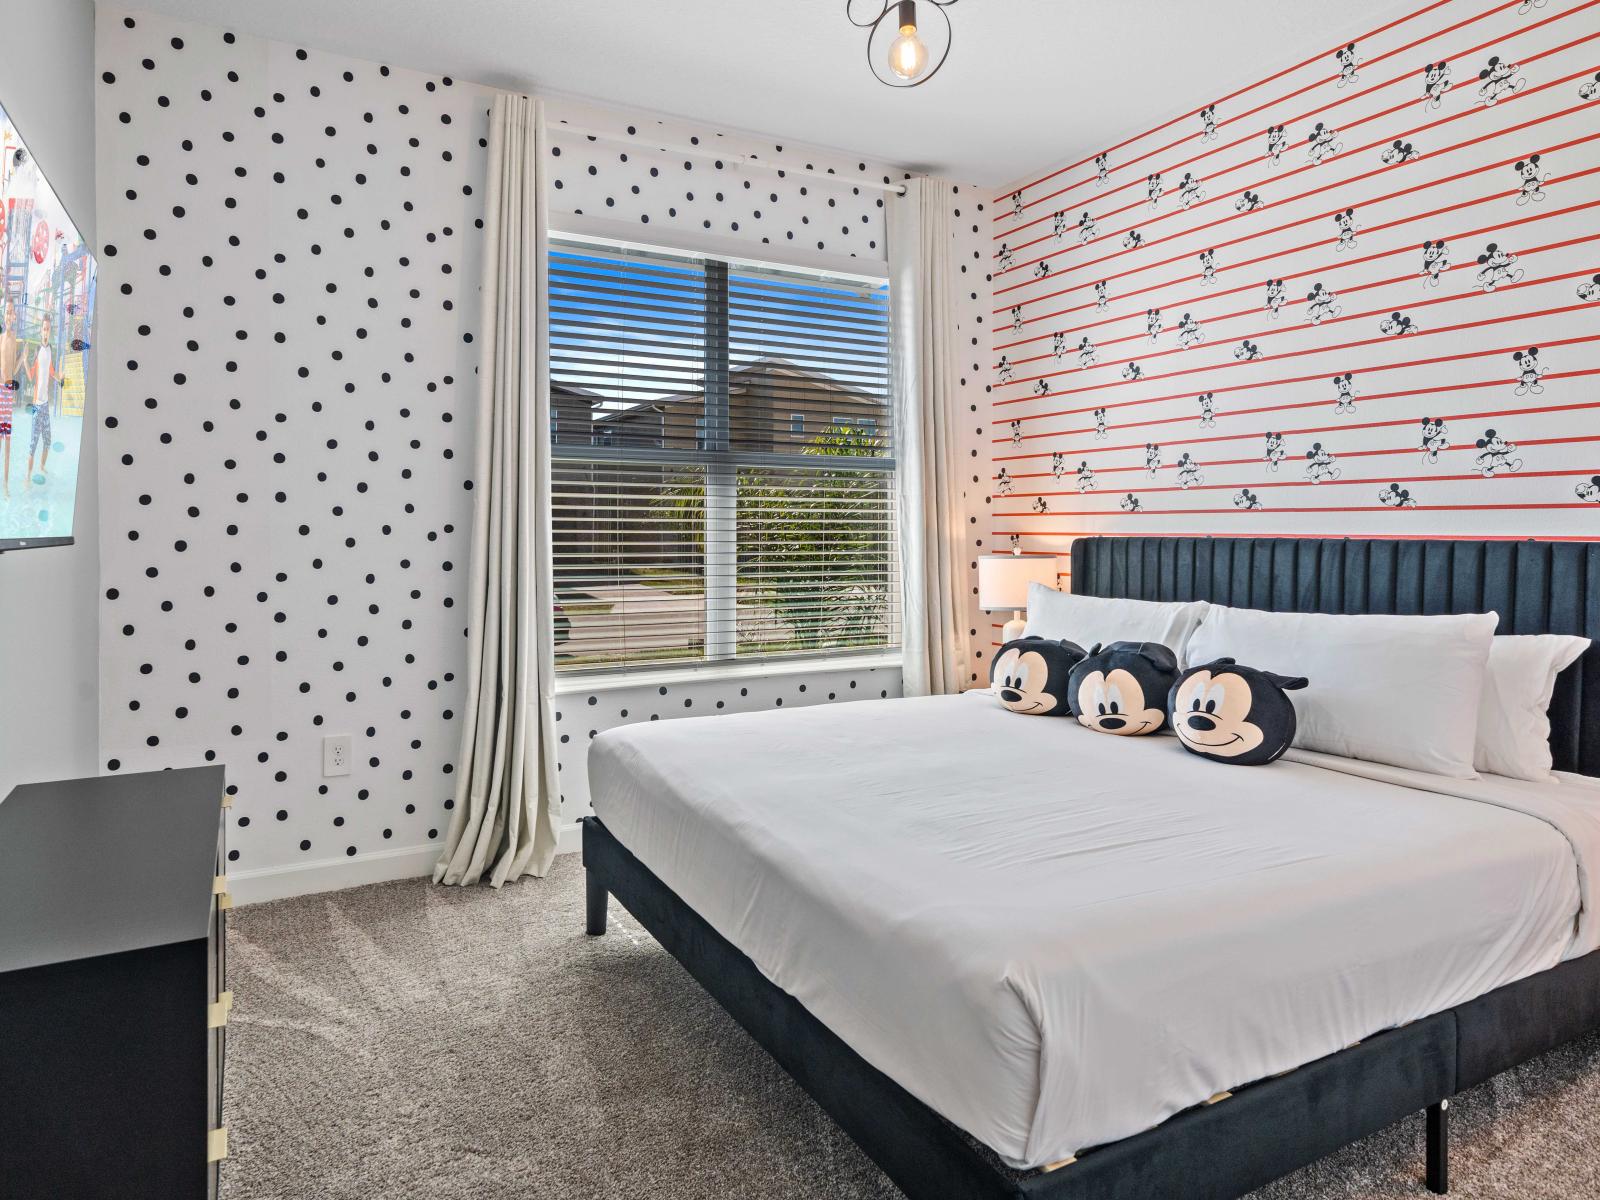 Micky Mouse Themed Bedroom of the Home in Davenport Florida - Experience the grandeur of king-sized bed - Smart TV and Netflix - Cozy retreat with a plush bed, perfect for relaxation